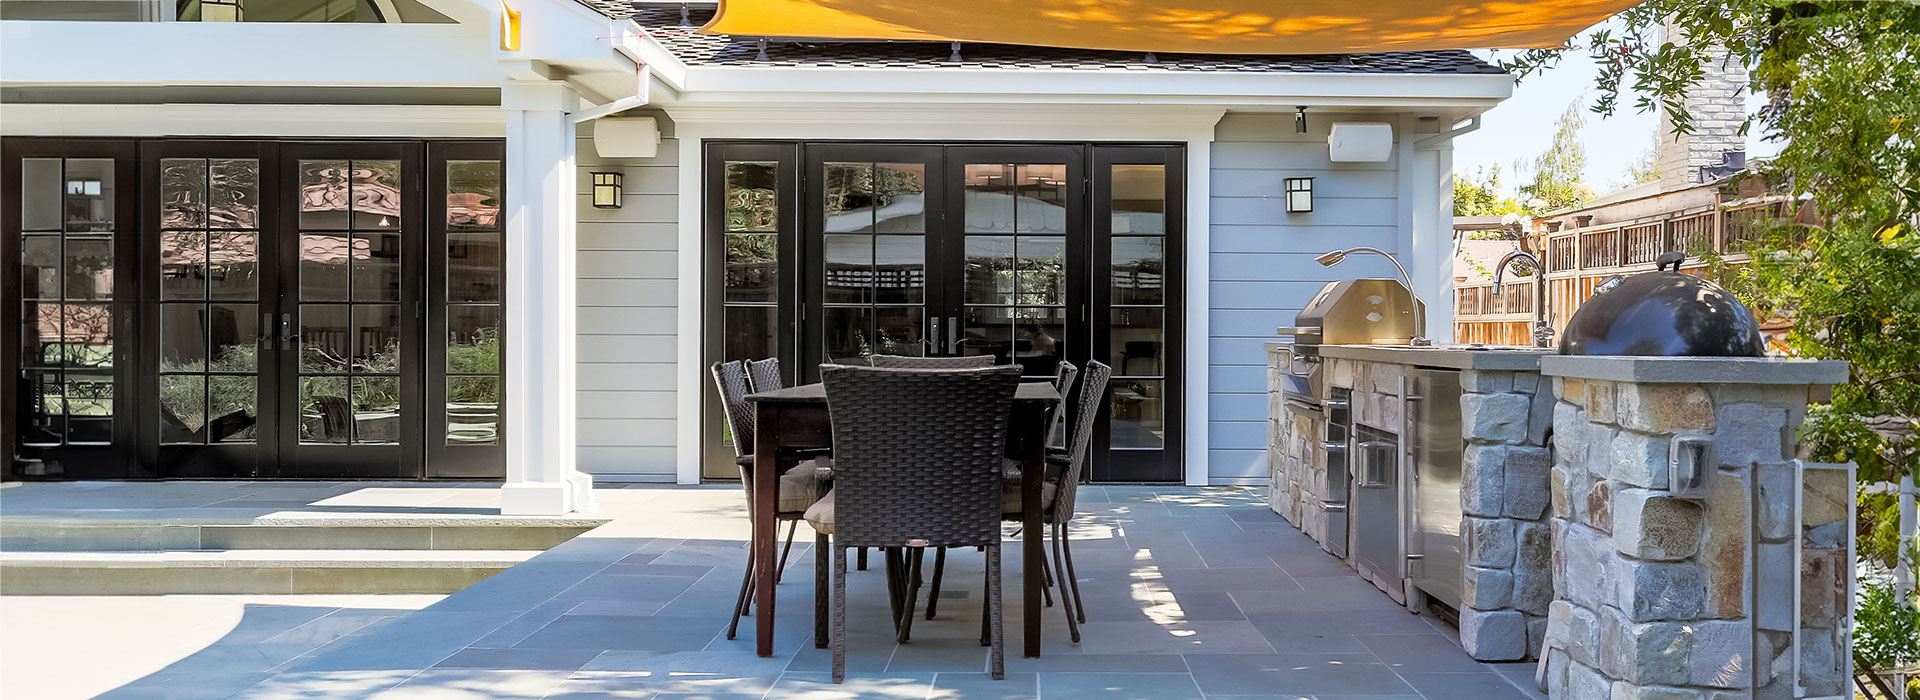 Investing In An Outdoor Renovation.